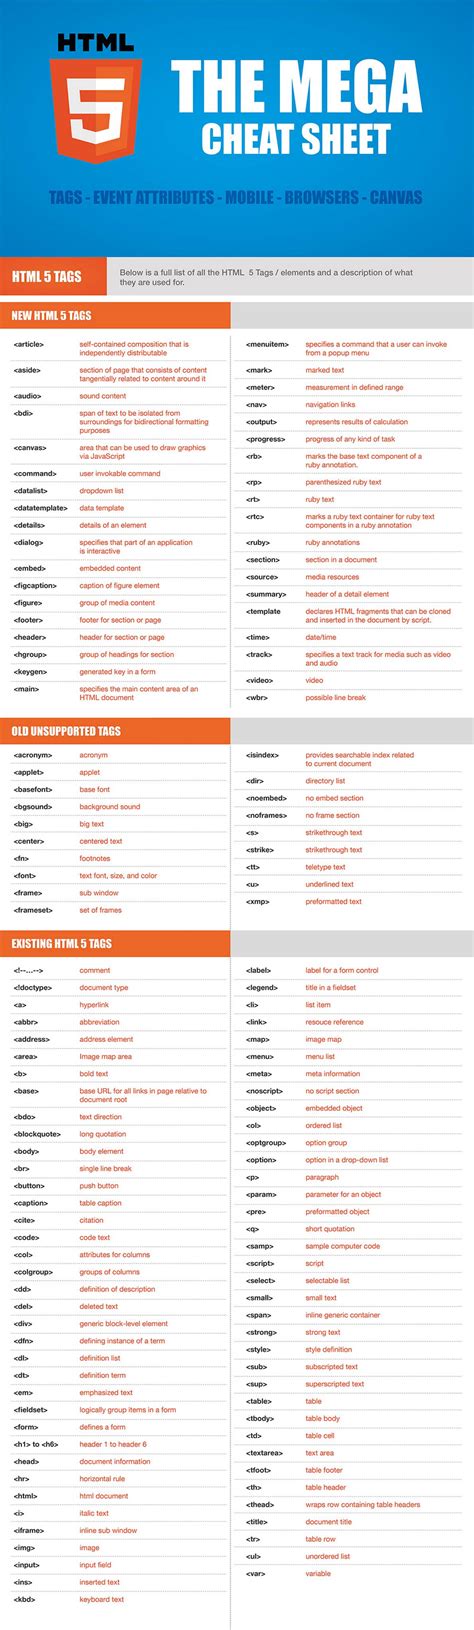 Learn Html Basics With This Epic Cheat Sheet Popup Menu Cheat Sheets Cheating